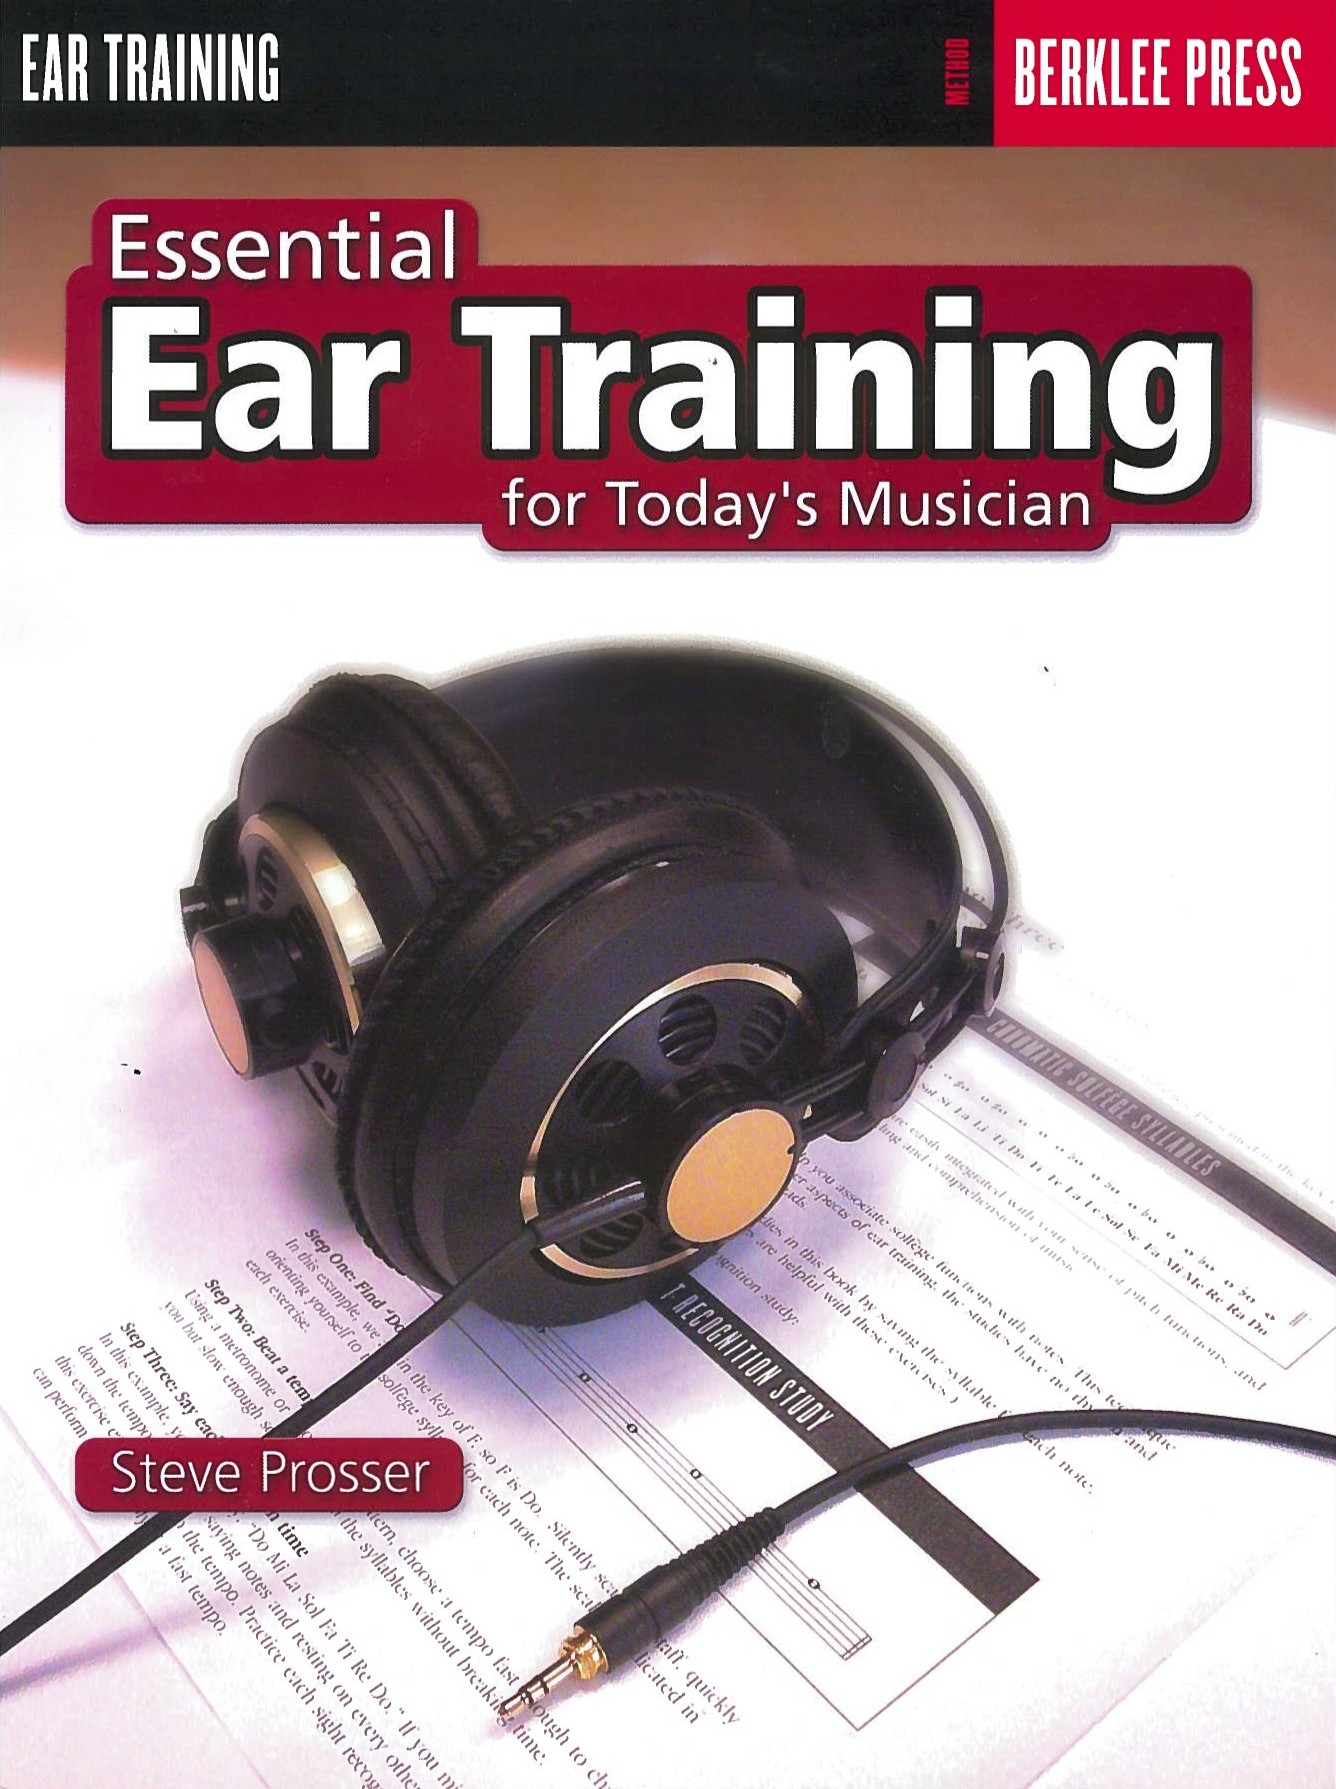 musicianship and aural training